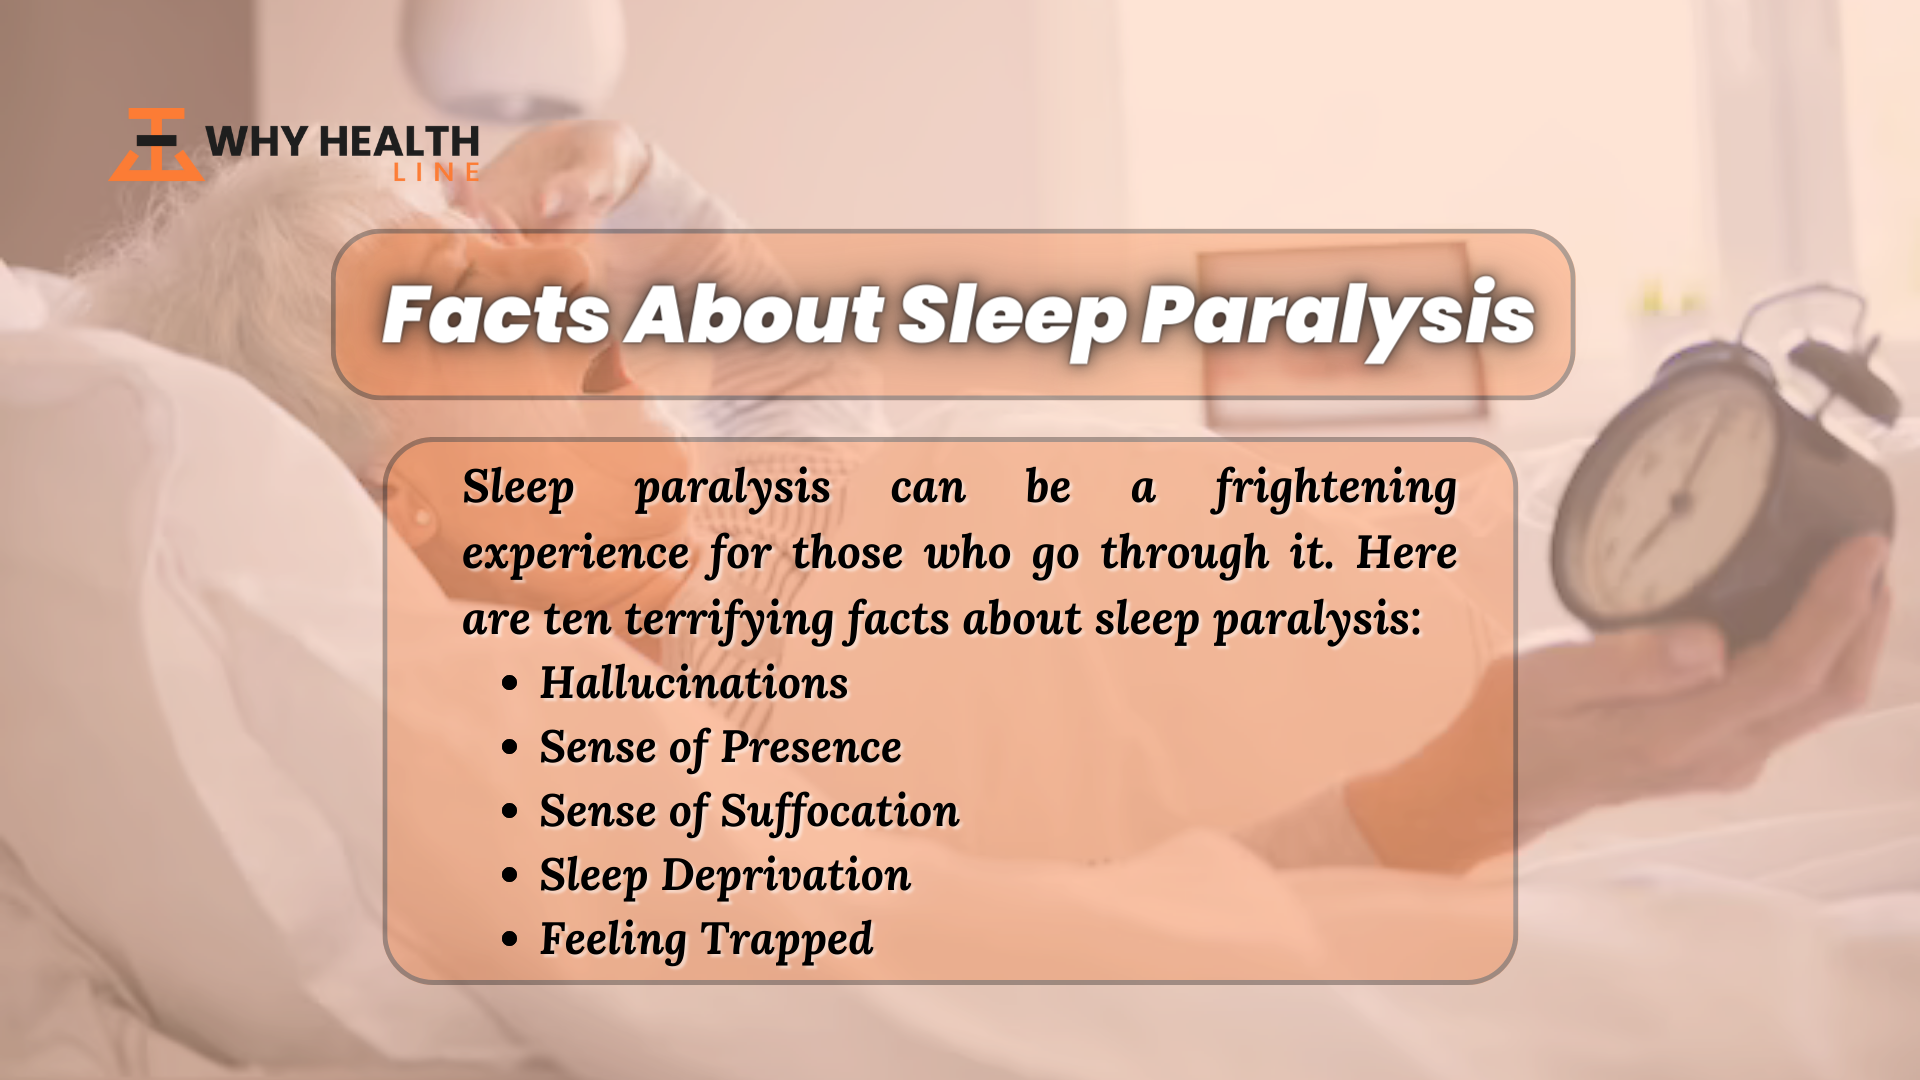 Facts about Sleep Paralysis